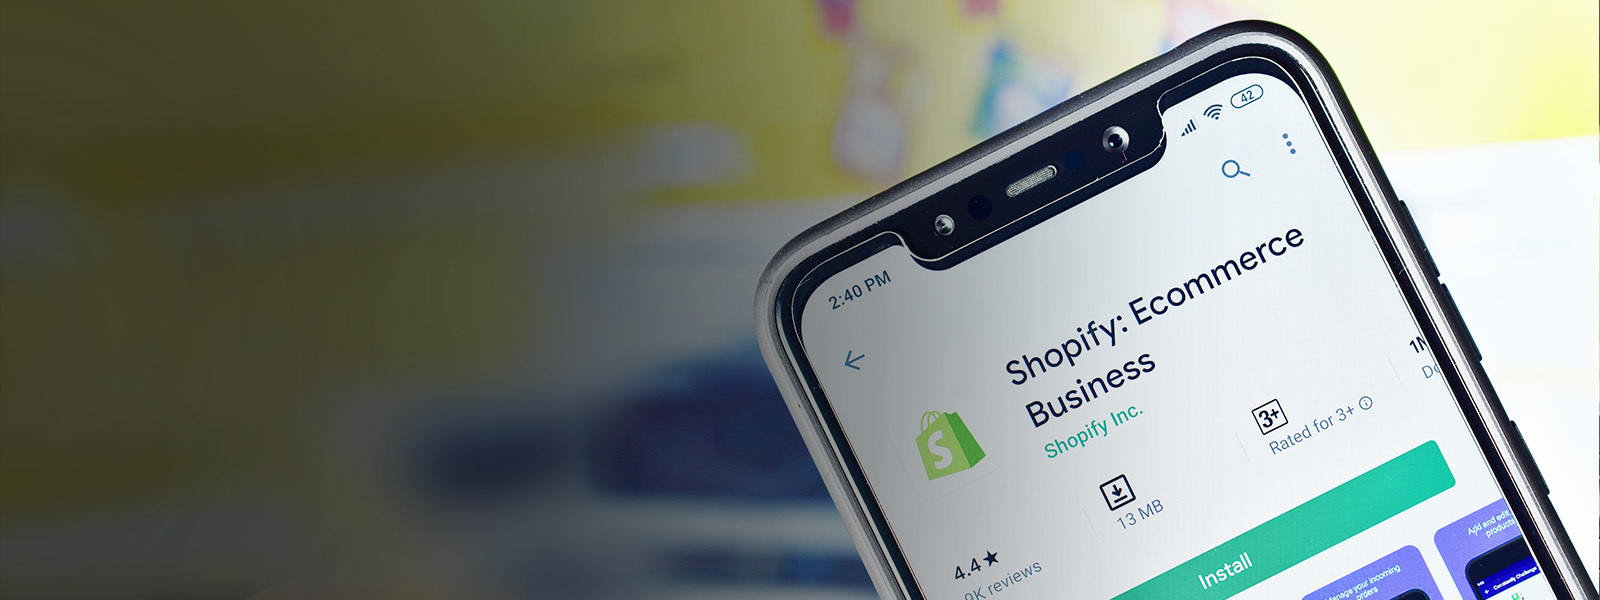 Shopify is a formidable e-commerce platform that makes moving over from another system easier than you may think. In this blog, we share our top technical considerations to keep in mind when planning your site migration.